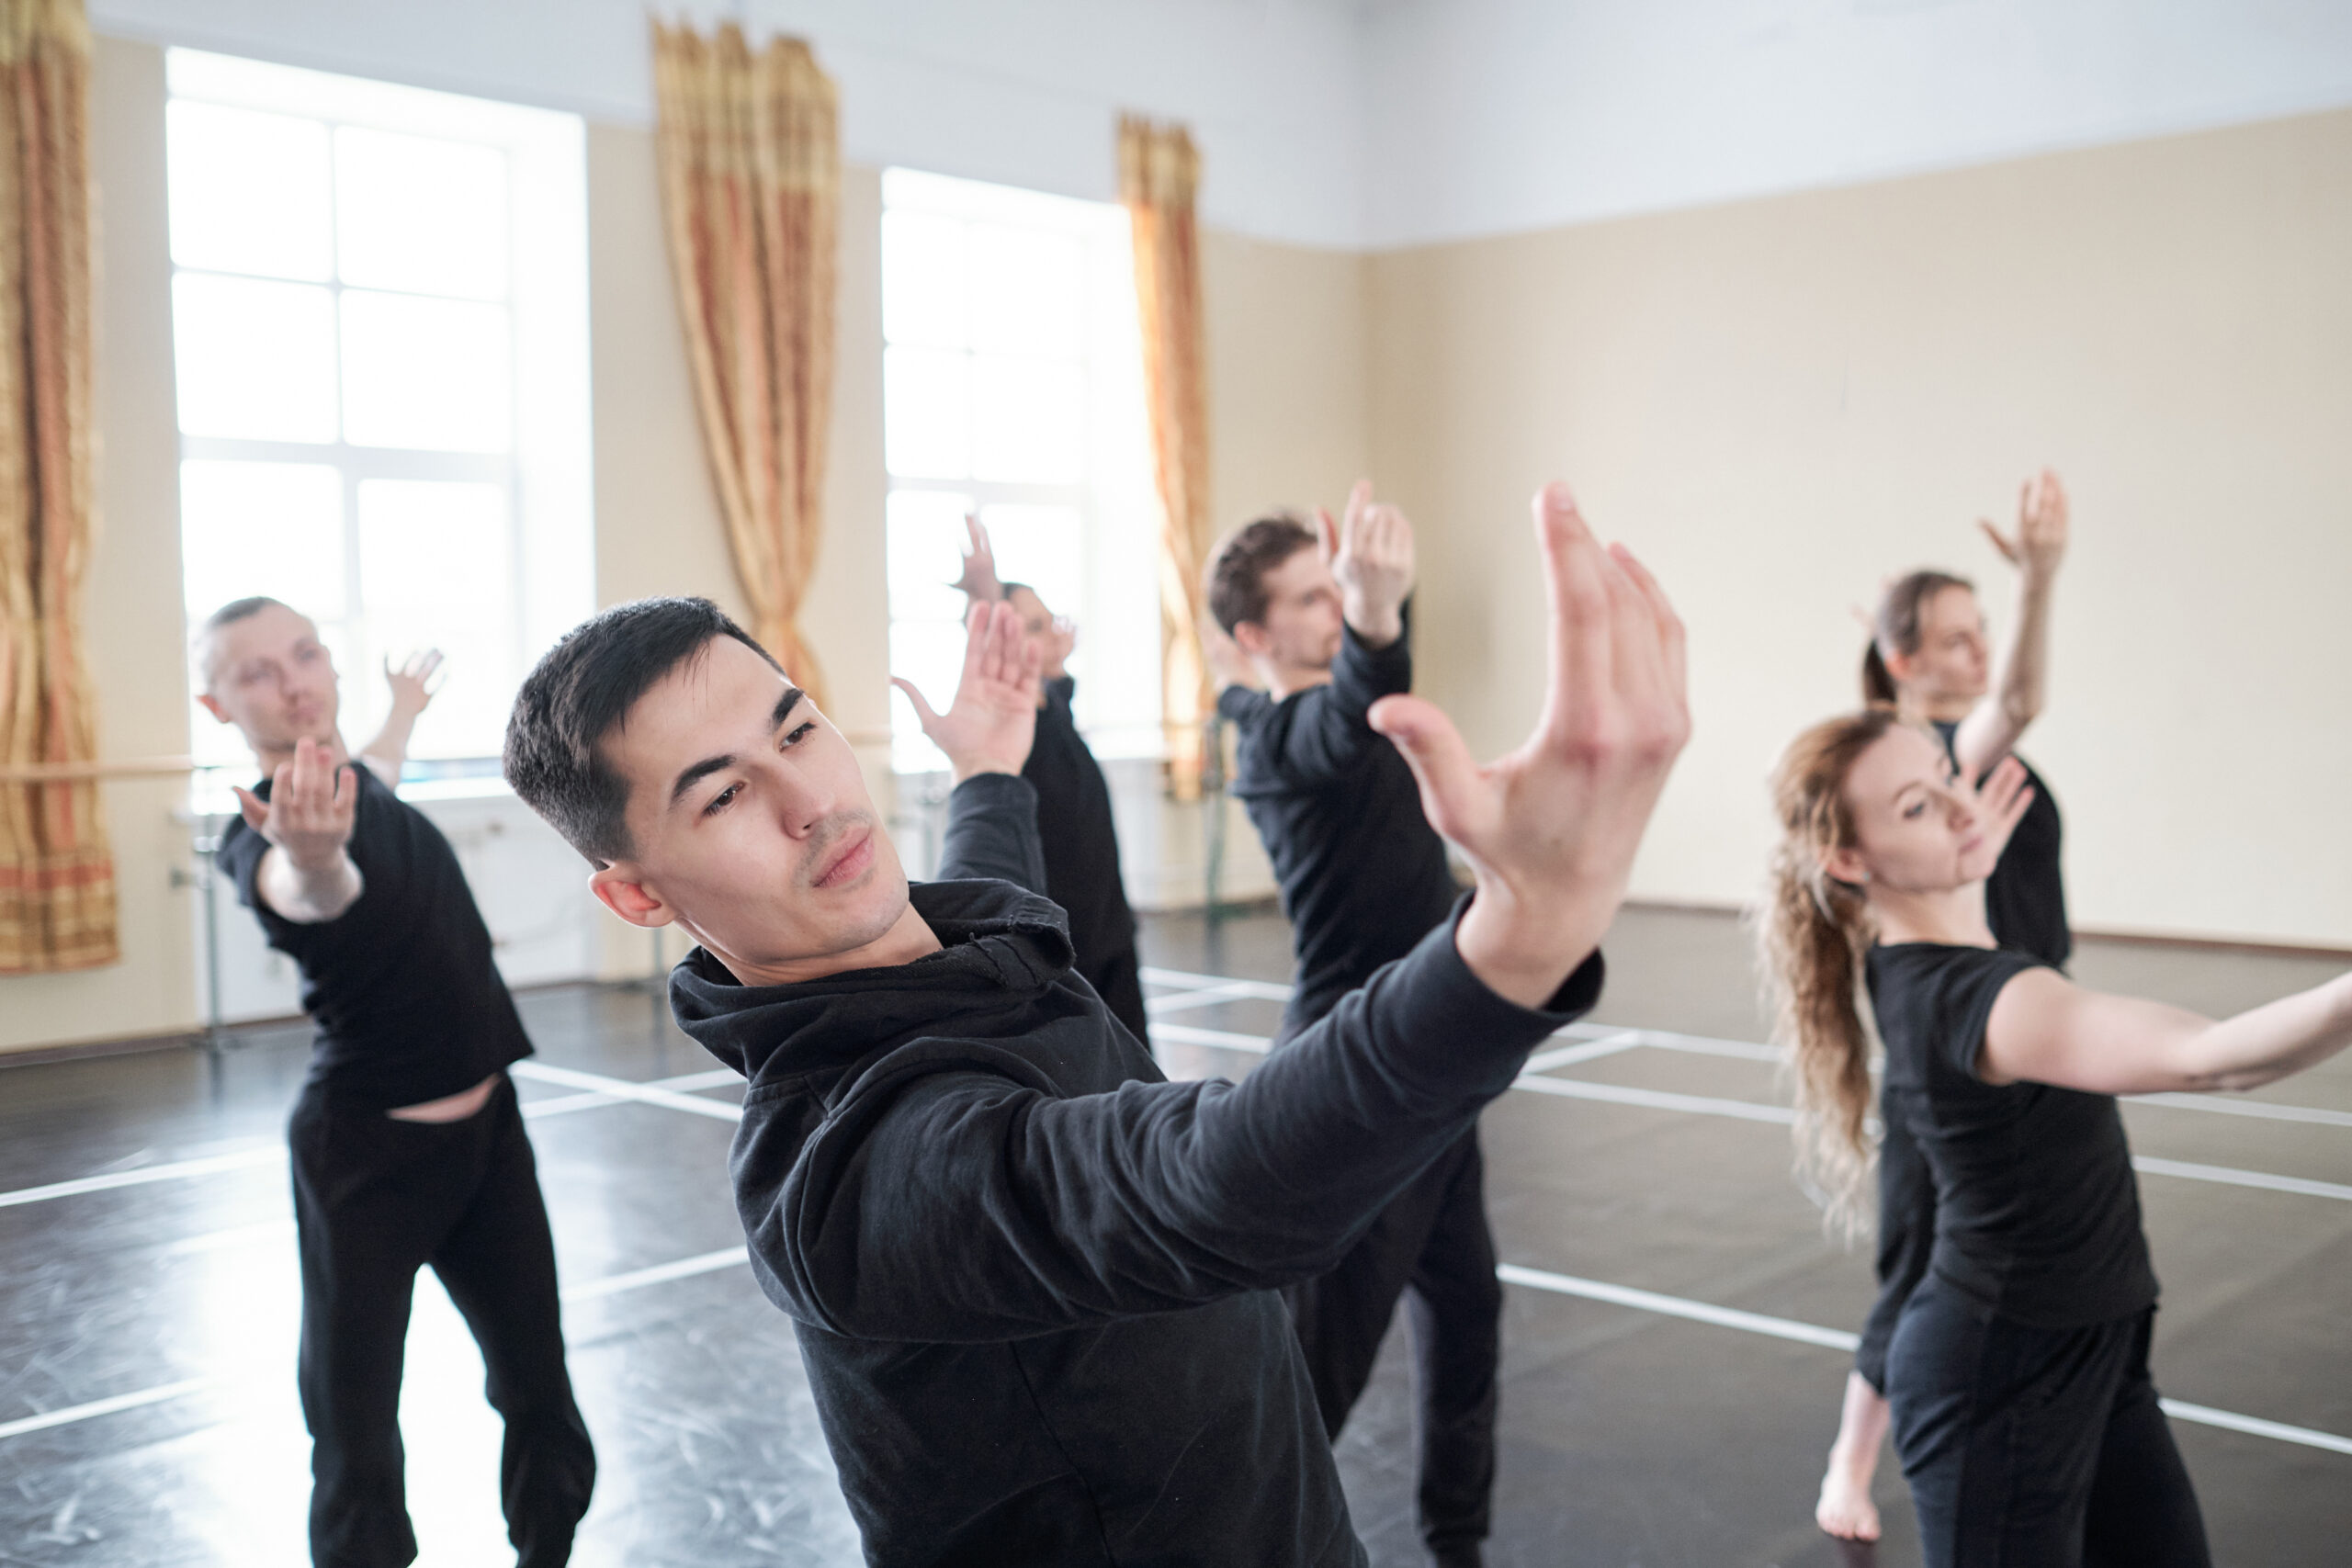 Young handsome man with outstretched arms doing one of dance exercises on background of his classmates in studio